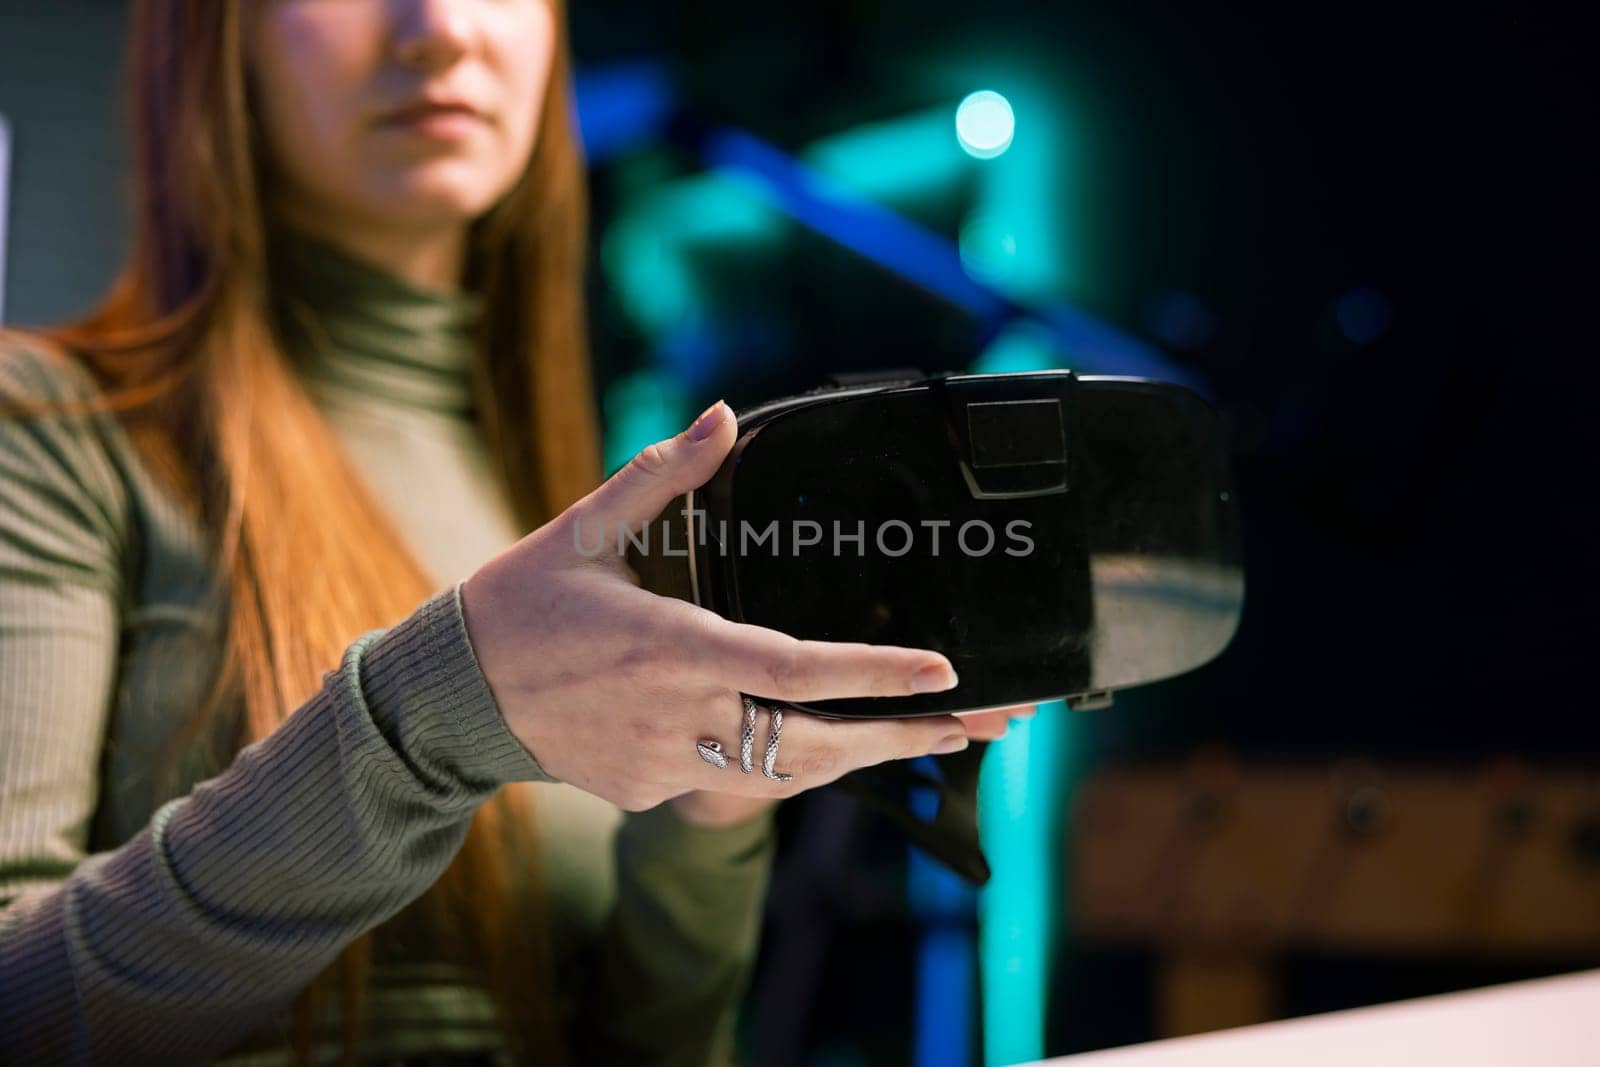 Gen Z tech content creator filming technology review of newly released VR goggles, unboxing them and presenting specifications to audience. Influencer showing virtual reality device to fans, close up